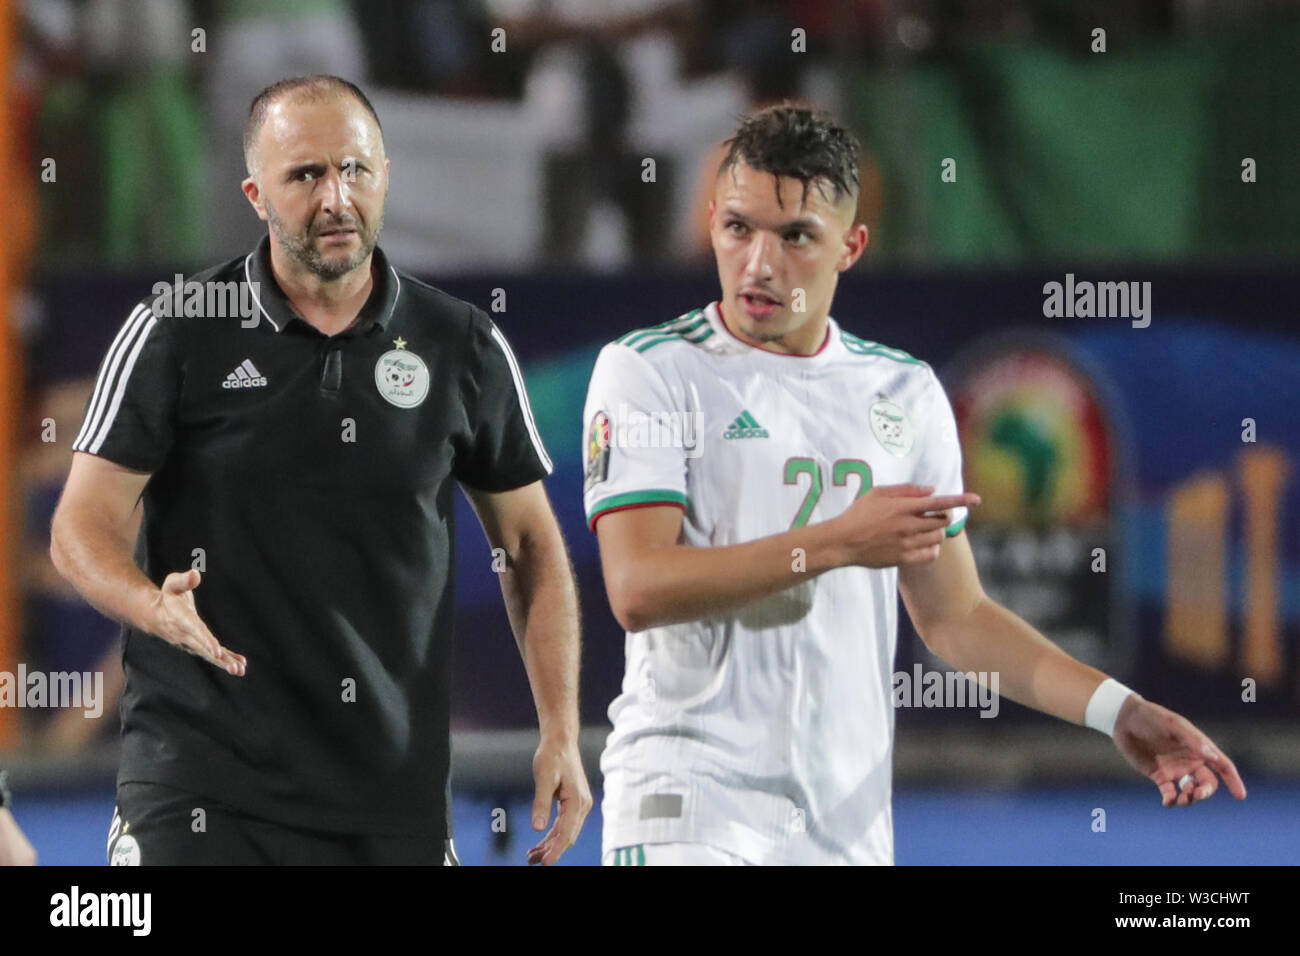 Cairo, Egypt. 14th July, 2019. Algeria's national team coach Djamel Belmadi (L) and Ismael Bennacer react during the 2019 Africa Cup of Nations semi-final soccer match between Algeria and Nigeria at the Cairo International Stadium. Credit: Oliver Weiken/dpa/Alamy Live News Stock Photo